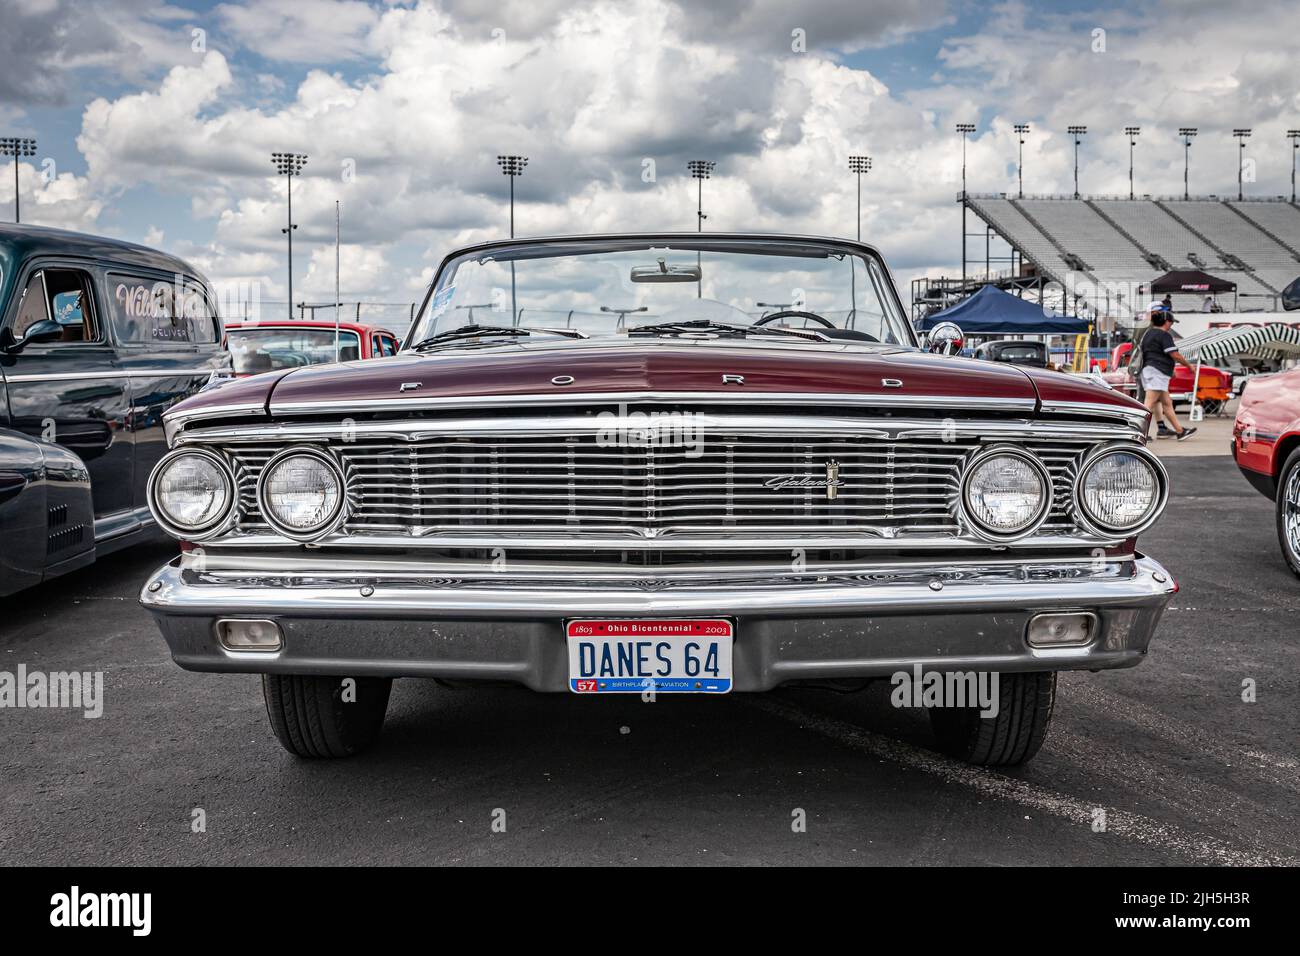 Lebanon, TN - May 14, 2022: Low perspective front view of a 1964 Ford Galaxie 500 Convertible at a local car show. Stock Photo